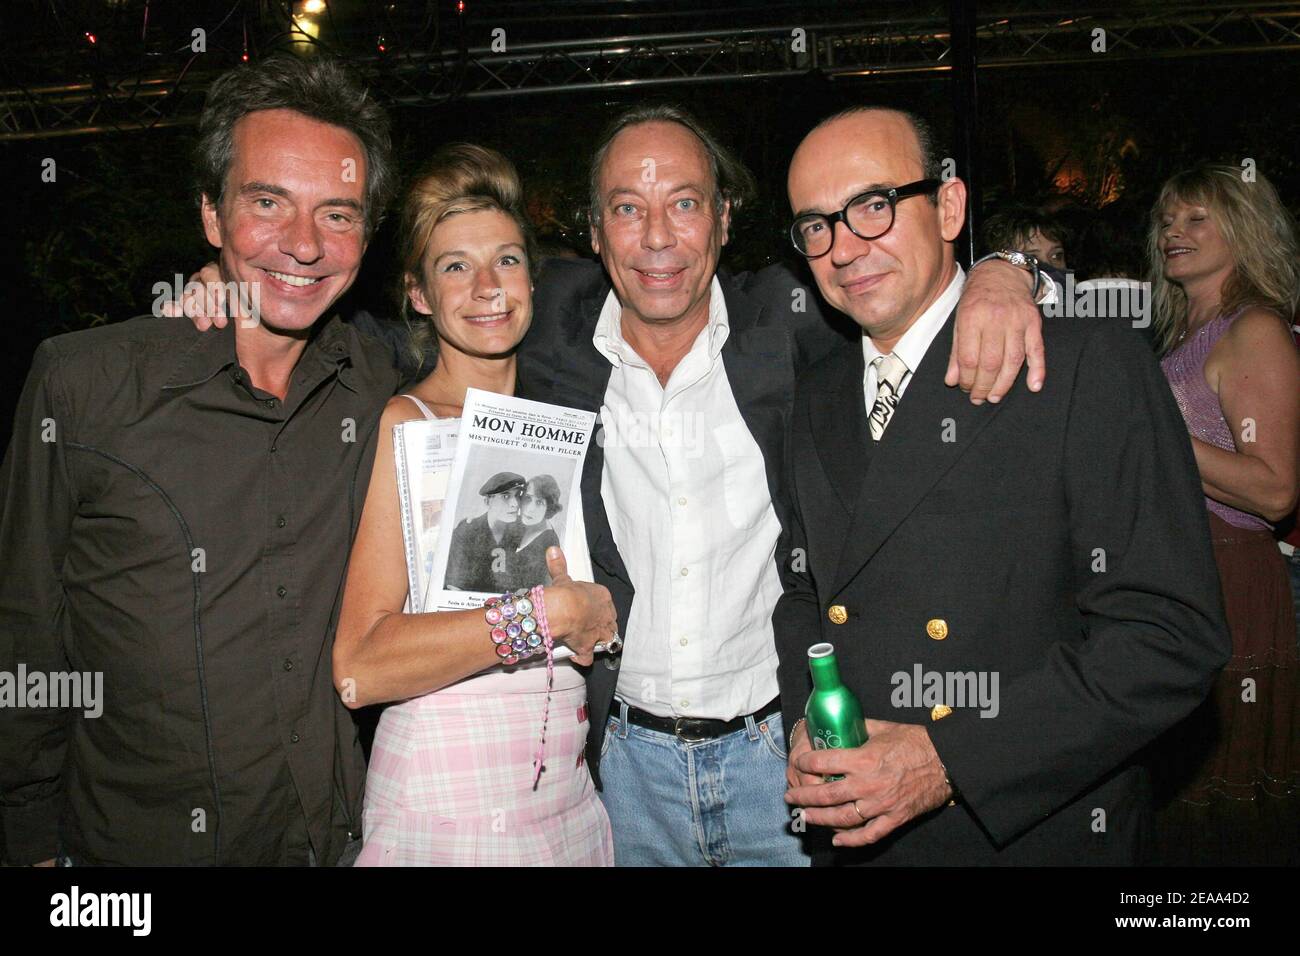 French journalist Basile de Koch, Moet RP Franck Couecou, French TV presenter Karl Zero attend the birthday party of Frigide Barjot at the club 'L'etoile' in Paris, France on october 17, 2005. Photo by Benoit Pinguet/ABACAPRESS.COM Stock Photo